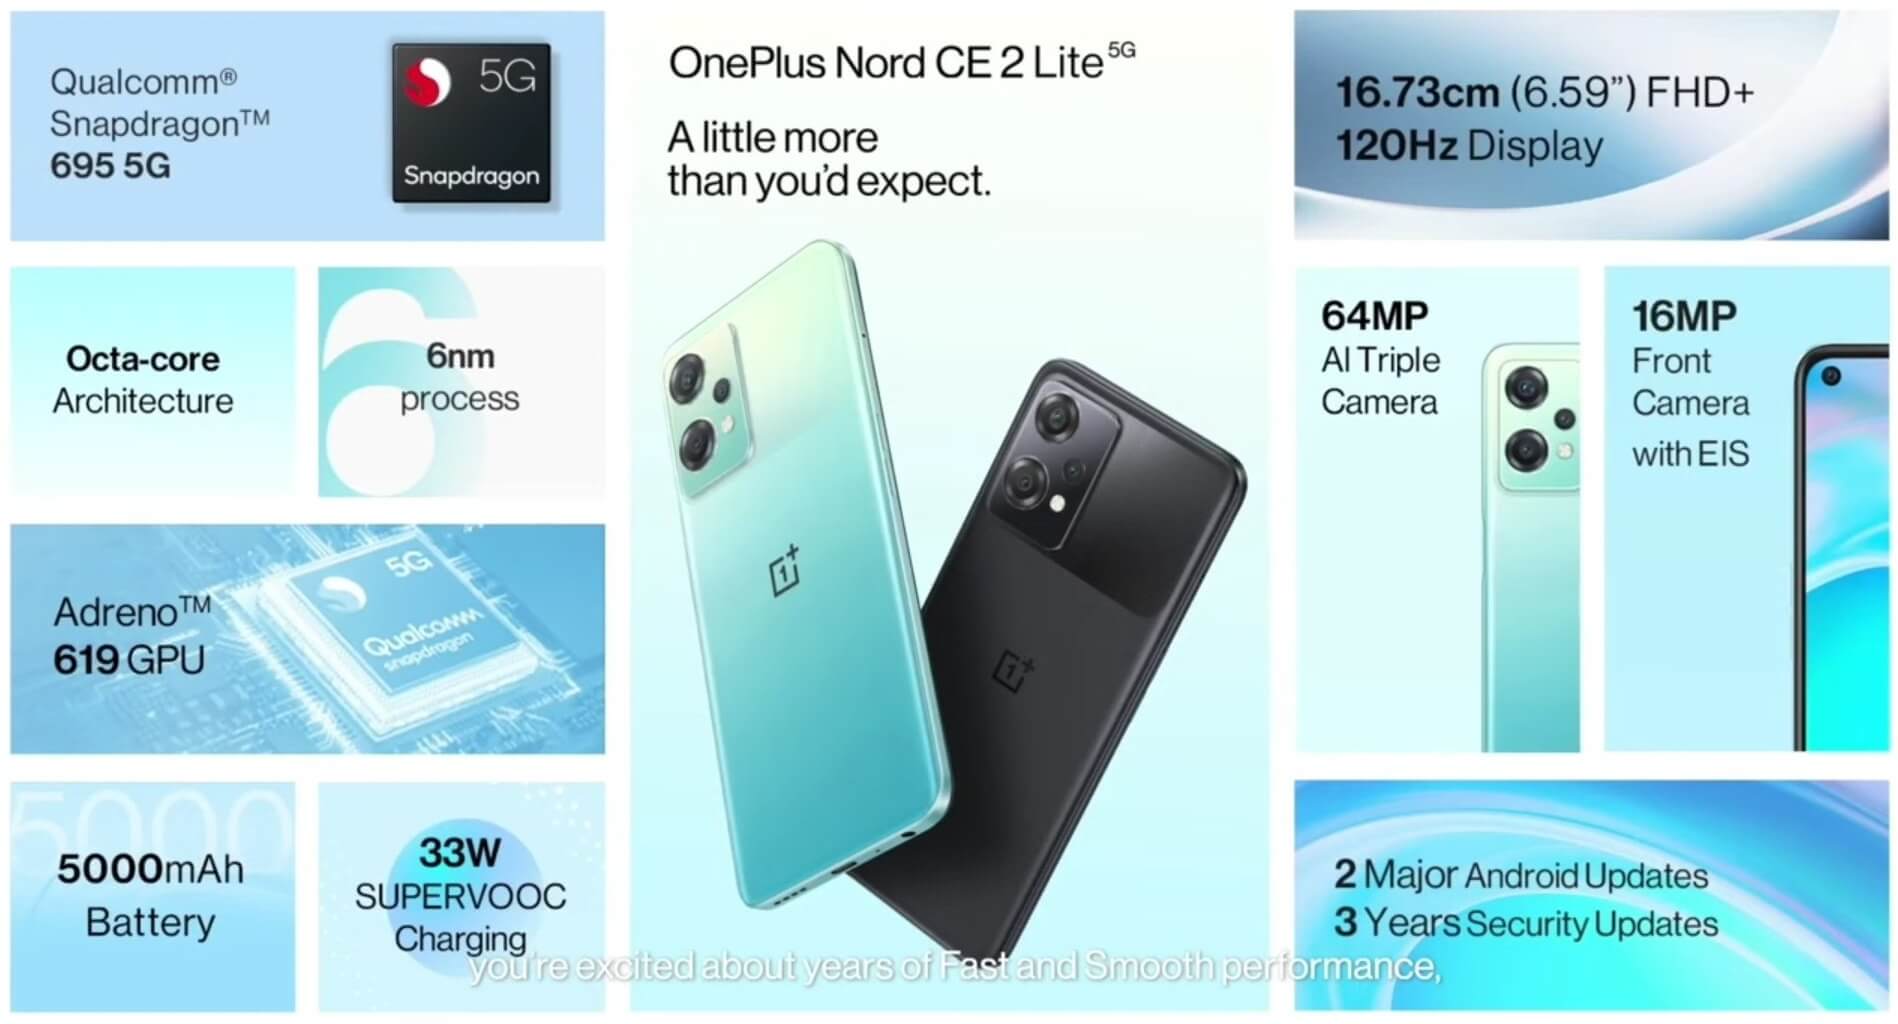 OnePlus Nord CE 2 Lite 5G featrues